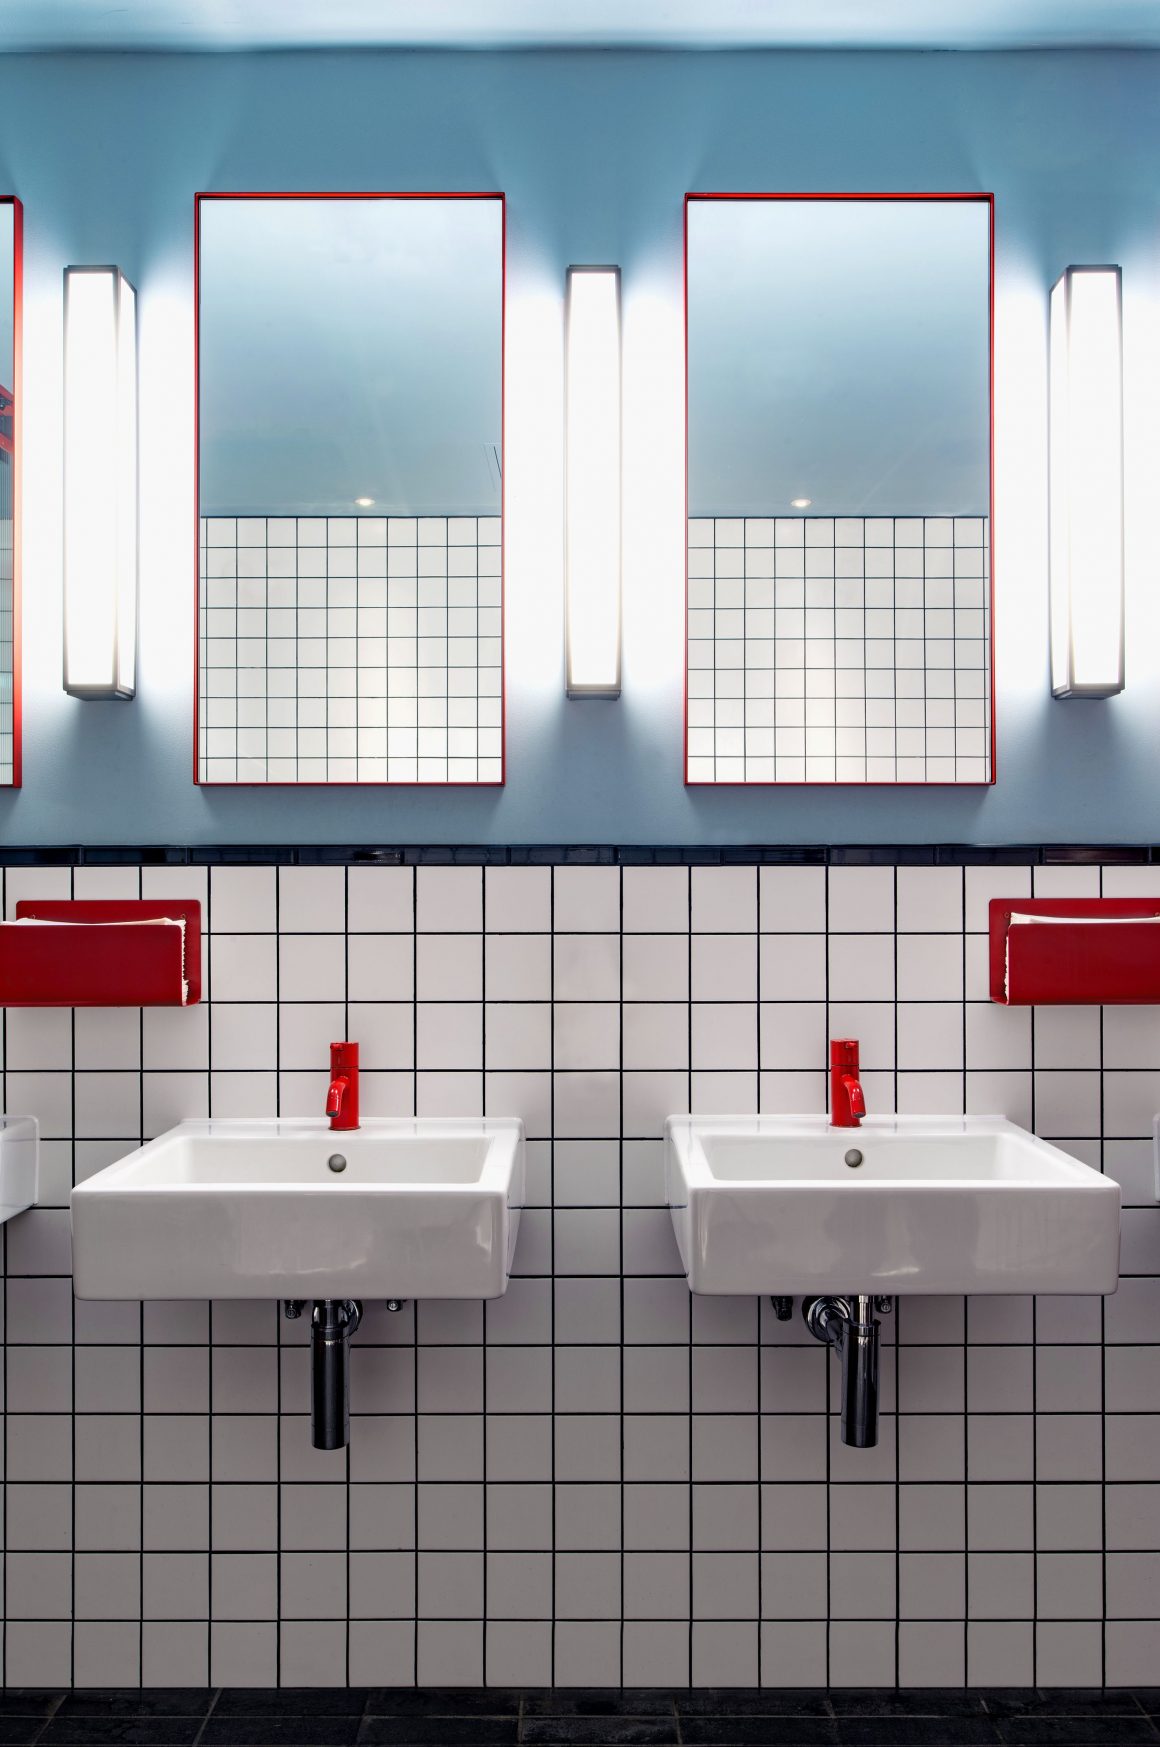 White grid bathroom with red taps